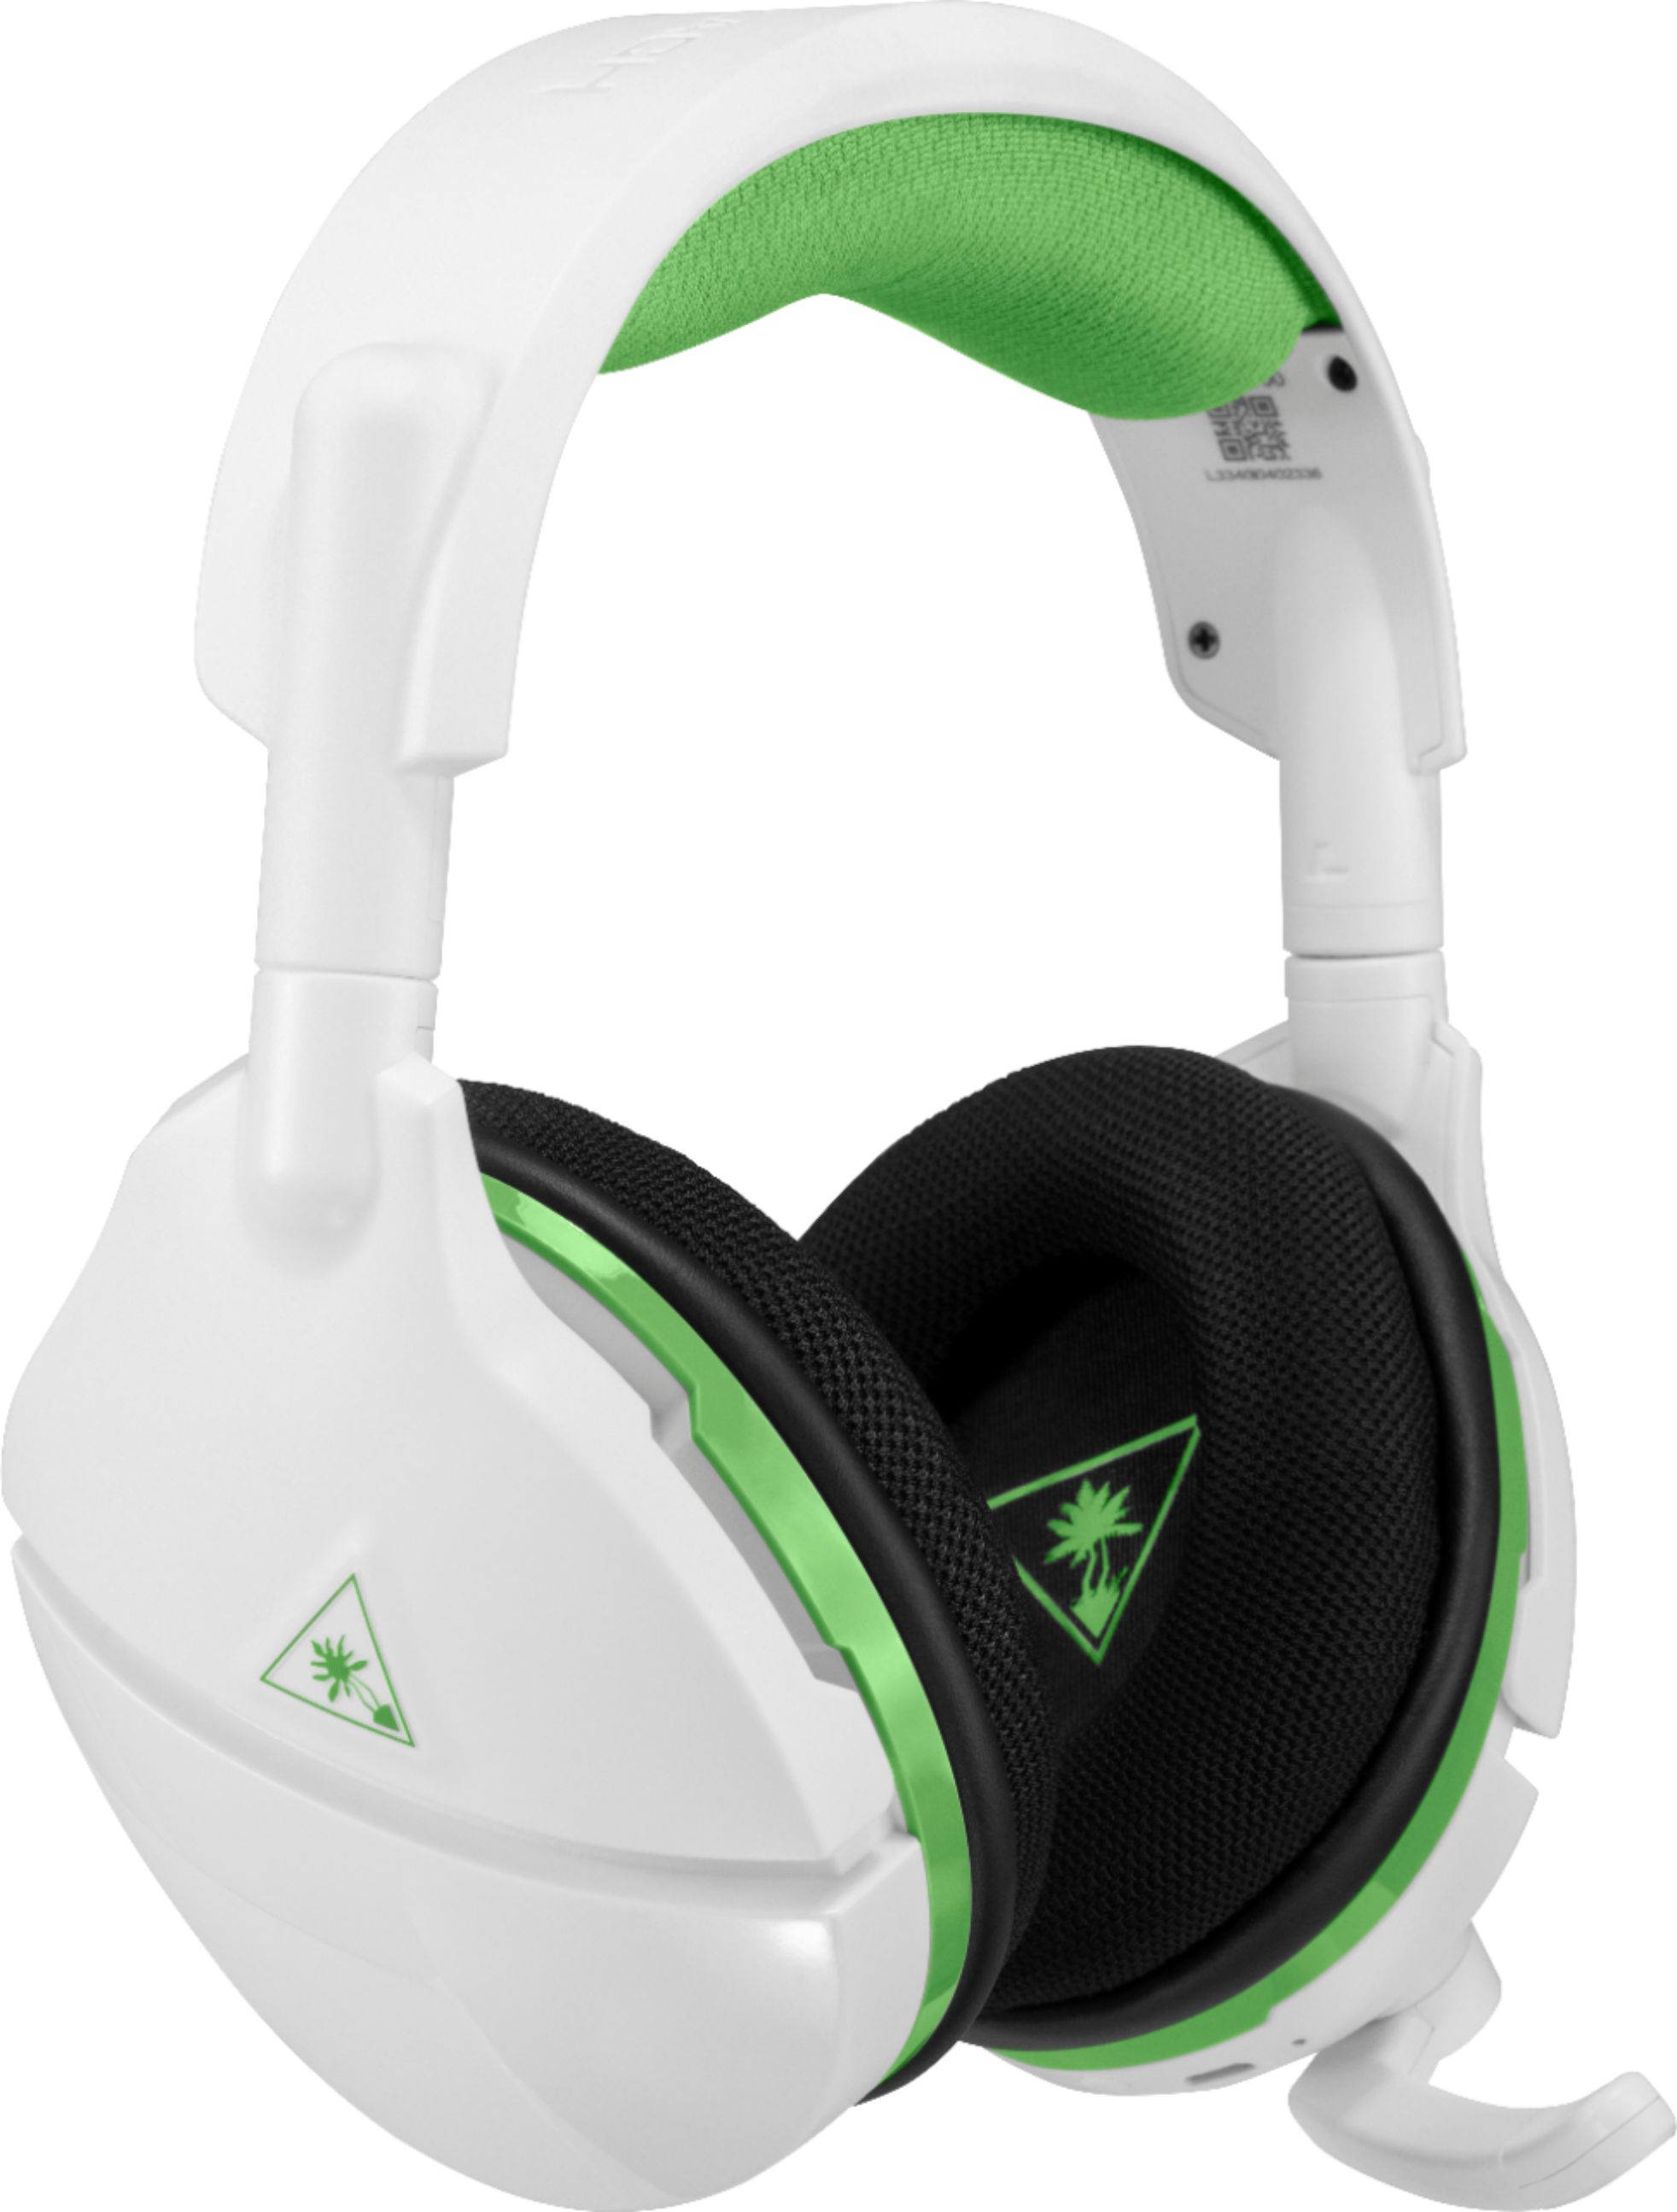 turtle beach stealth 600 wireless headset for xbox one